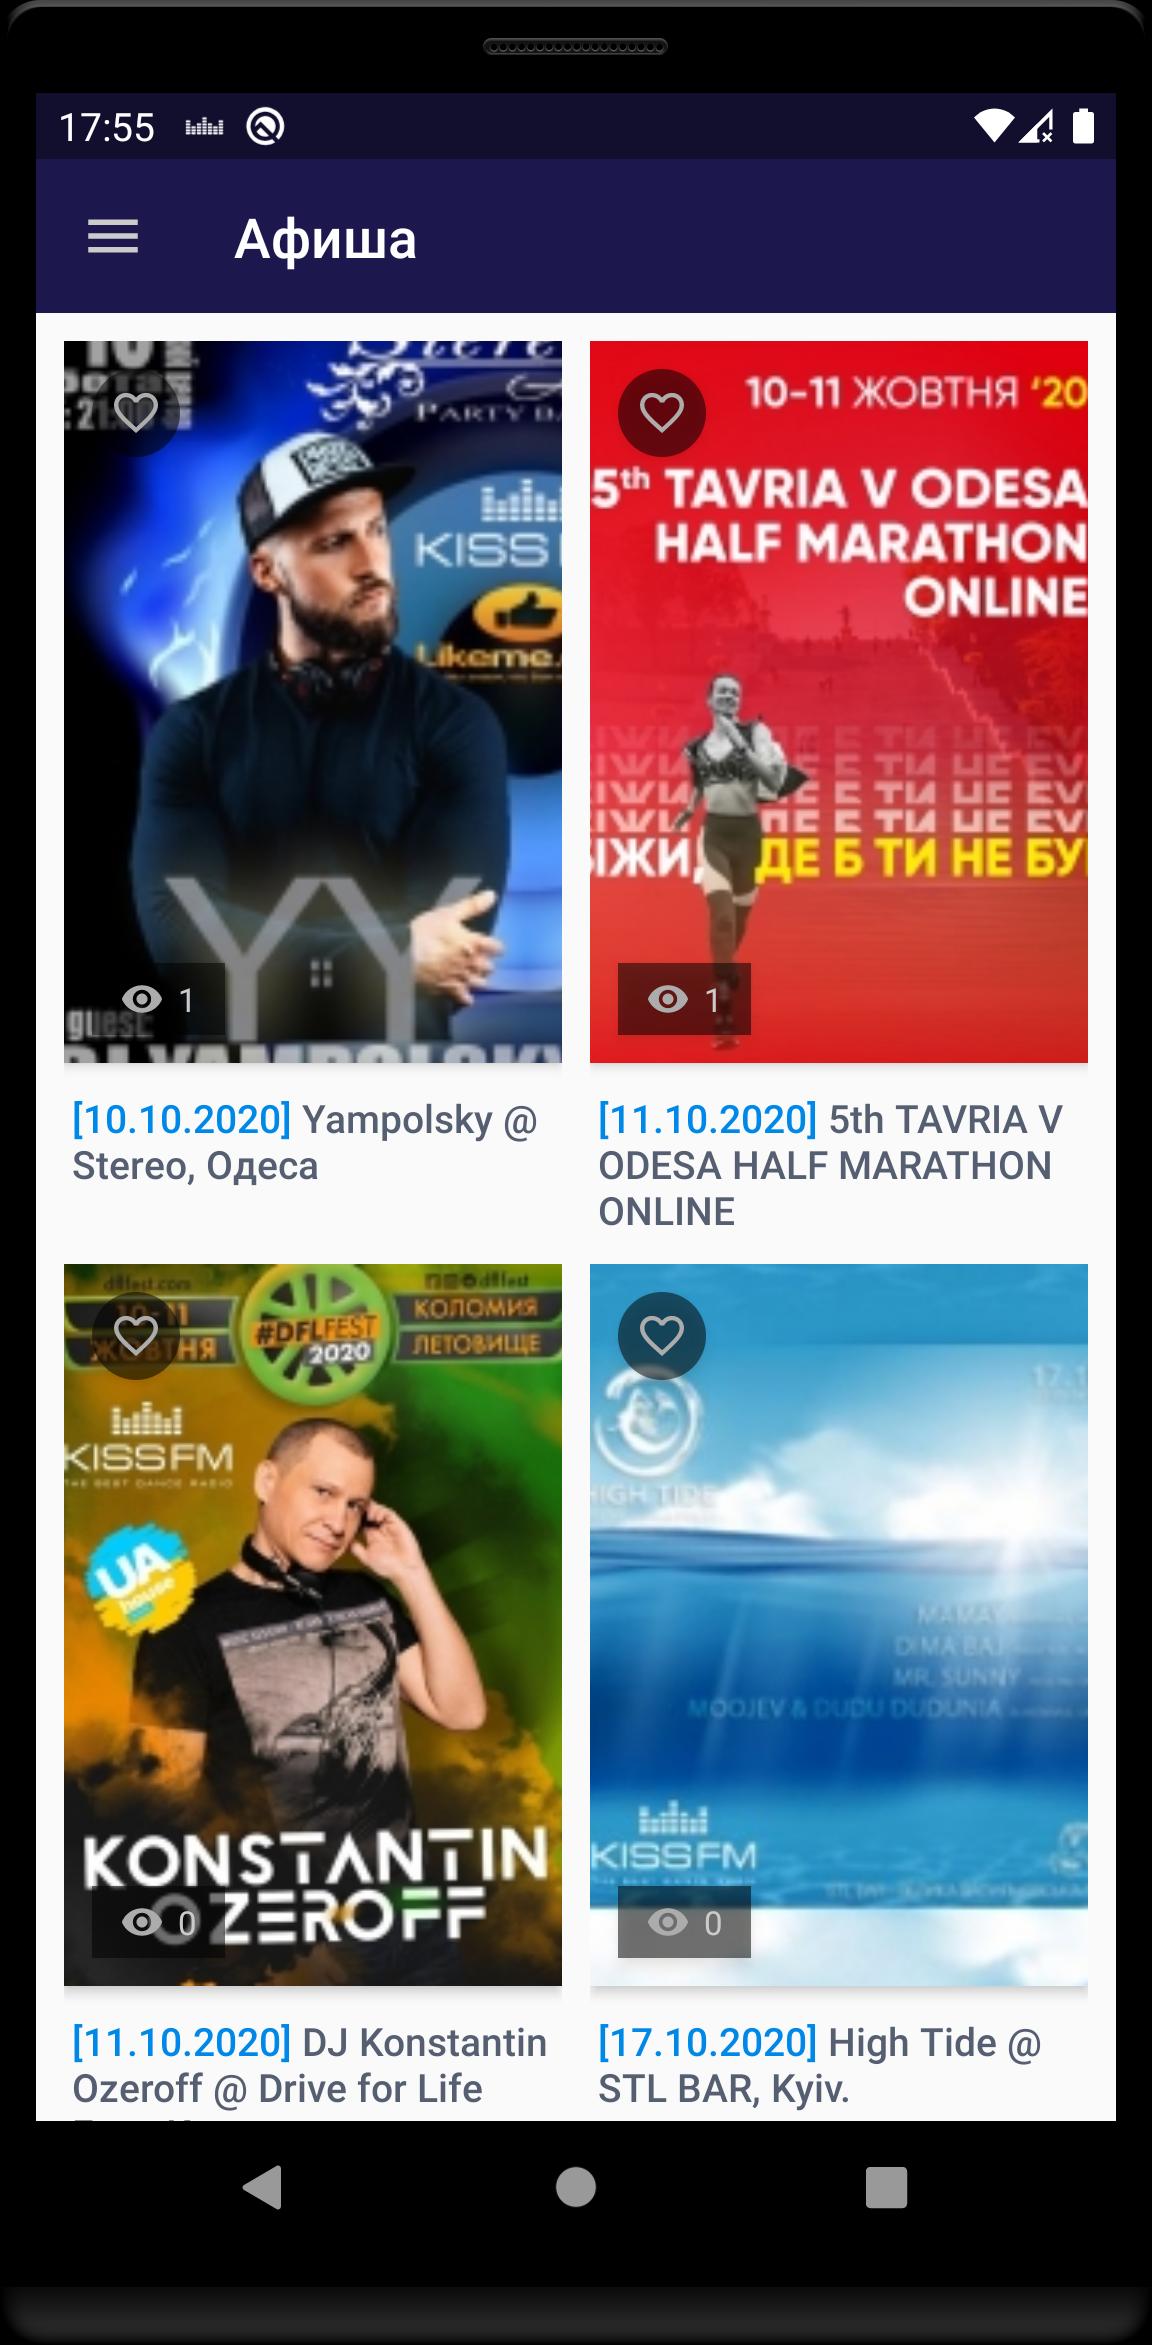 KISS FM for Android - APK Download